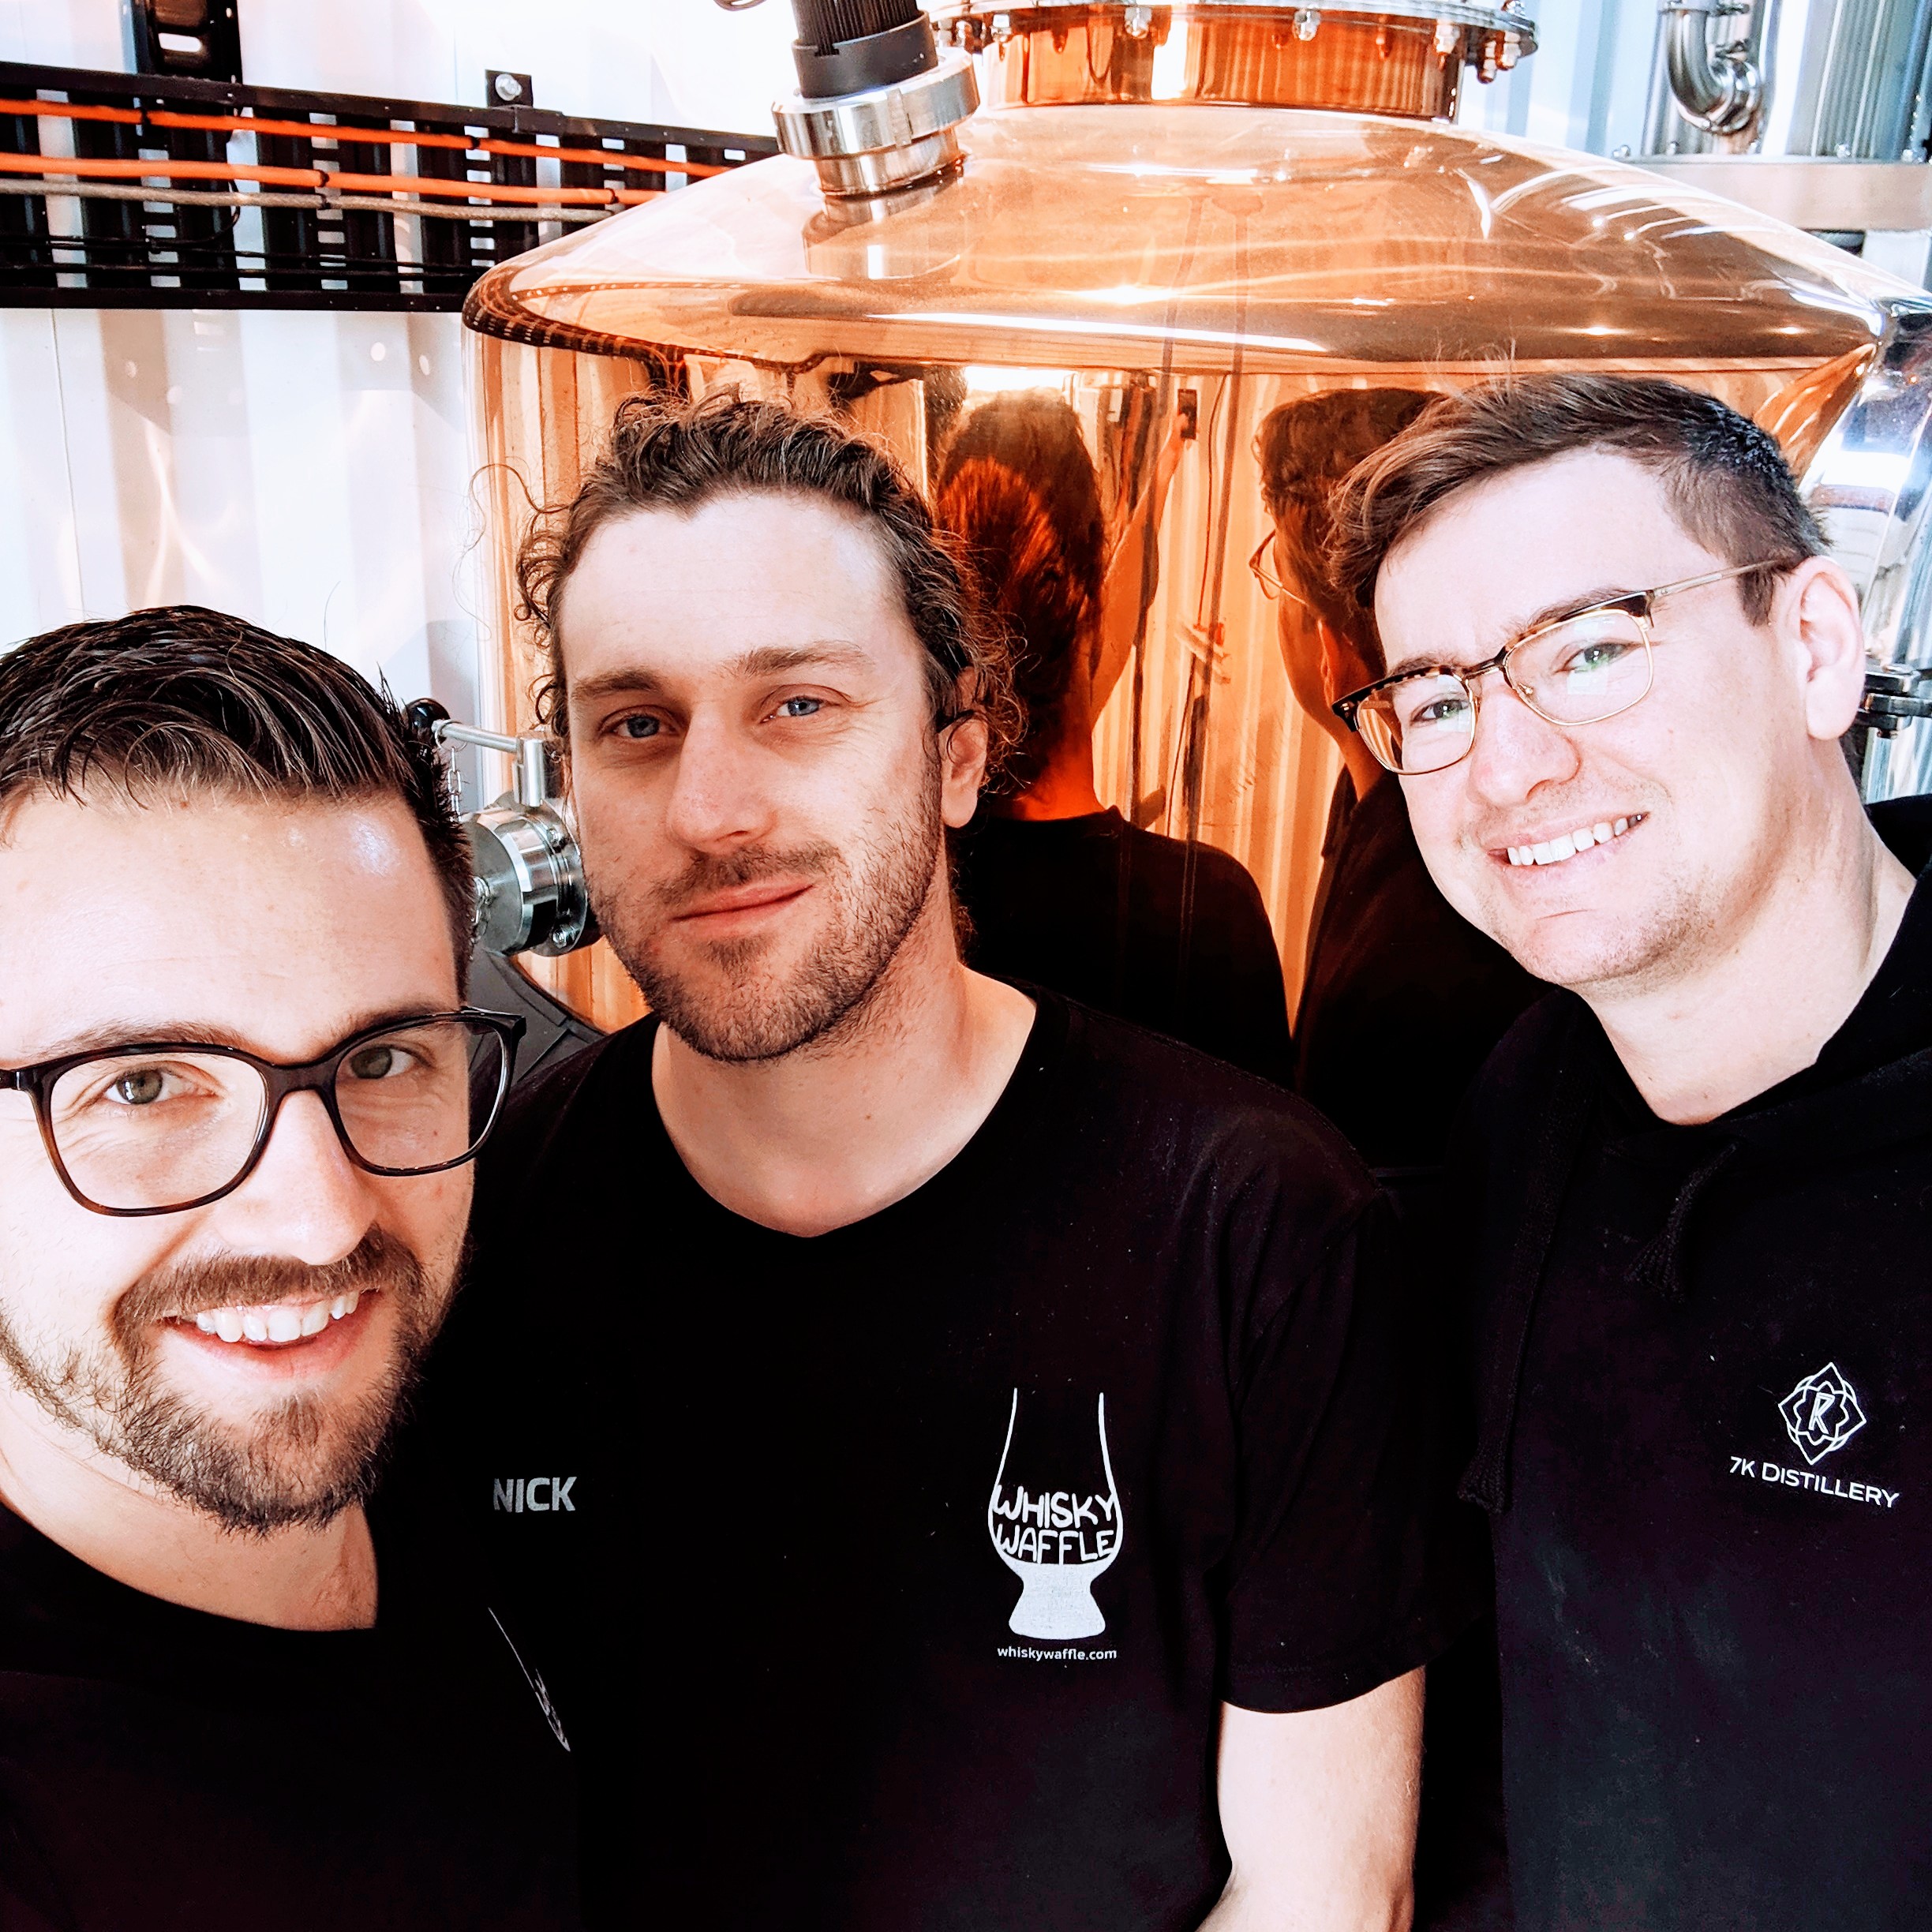 Three men standing in front of a whisky still. Two of them are Nick and Ted, world famous whisky writers from the blog Whisky Waffle. The other man is Tyler Clark, the owner of 7K Distillery